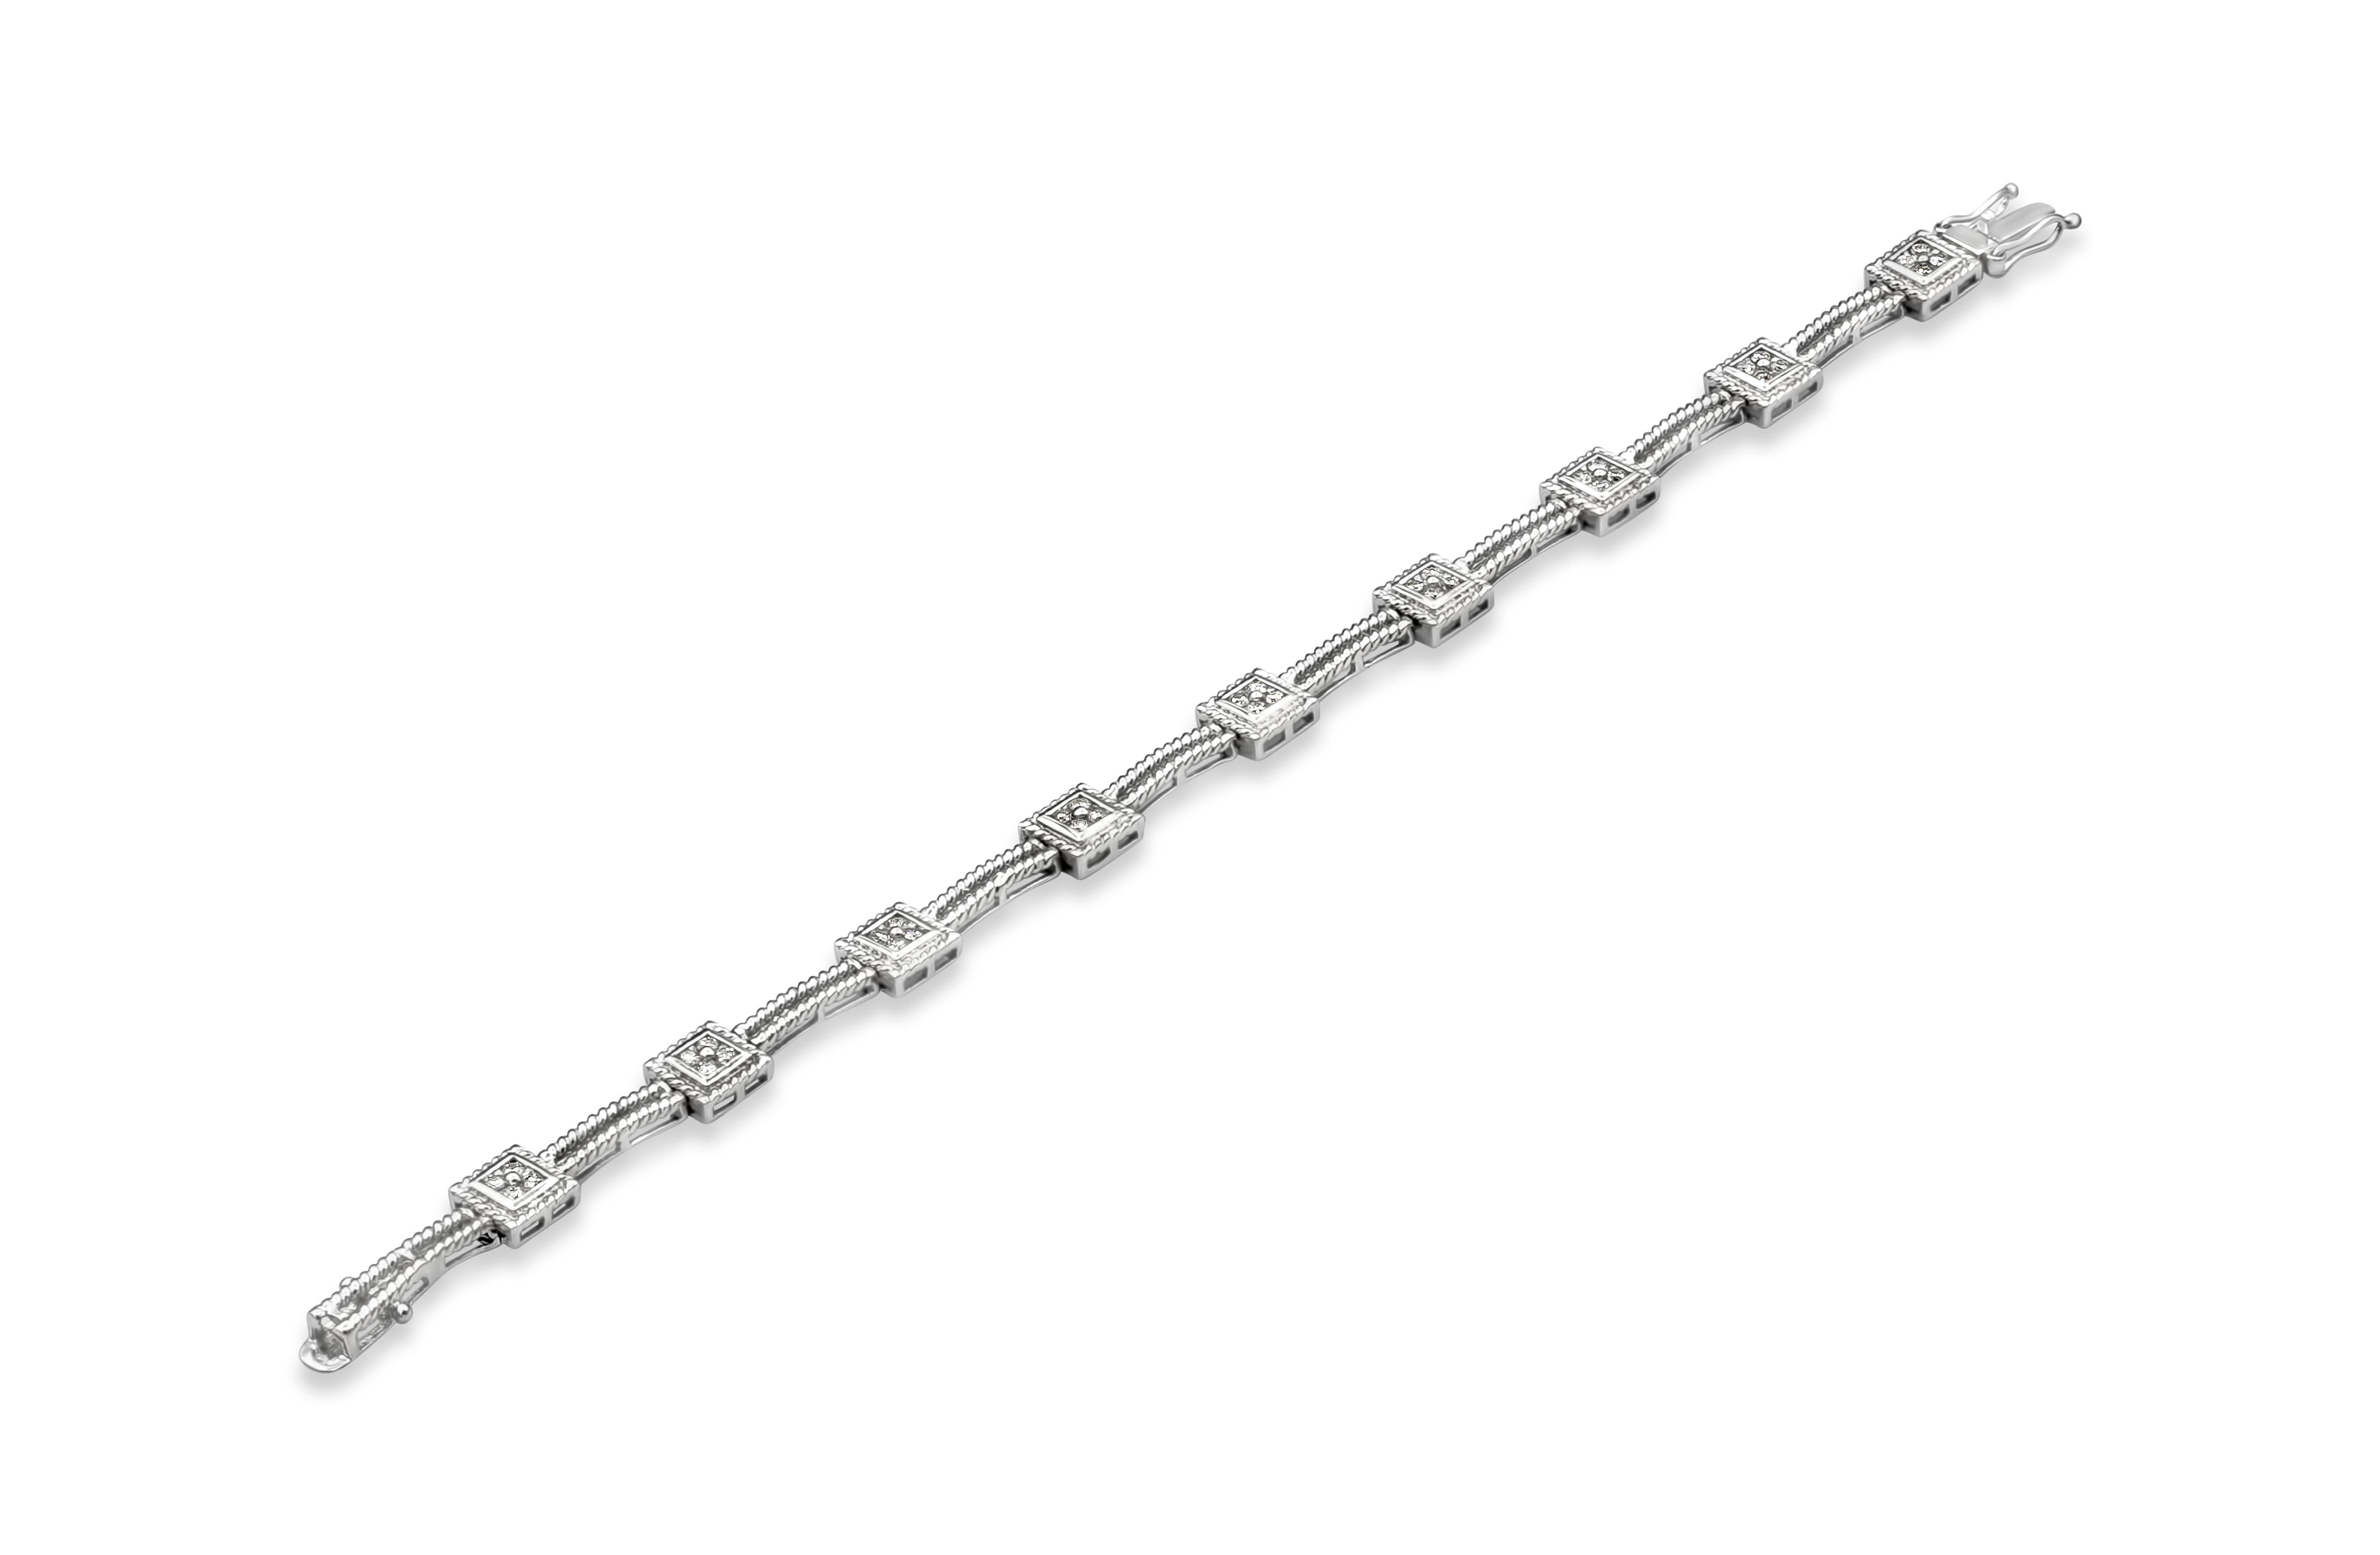 A fashionable bracelet showcasing 36 round brilliant diamonds set in a box, spaced evenly in a double row rope design made in 14K White Gold. Diamonds weigh 0.75 carats total, G color and 12 in clarity.




